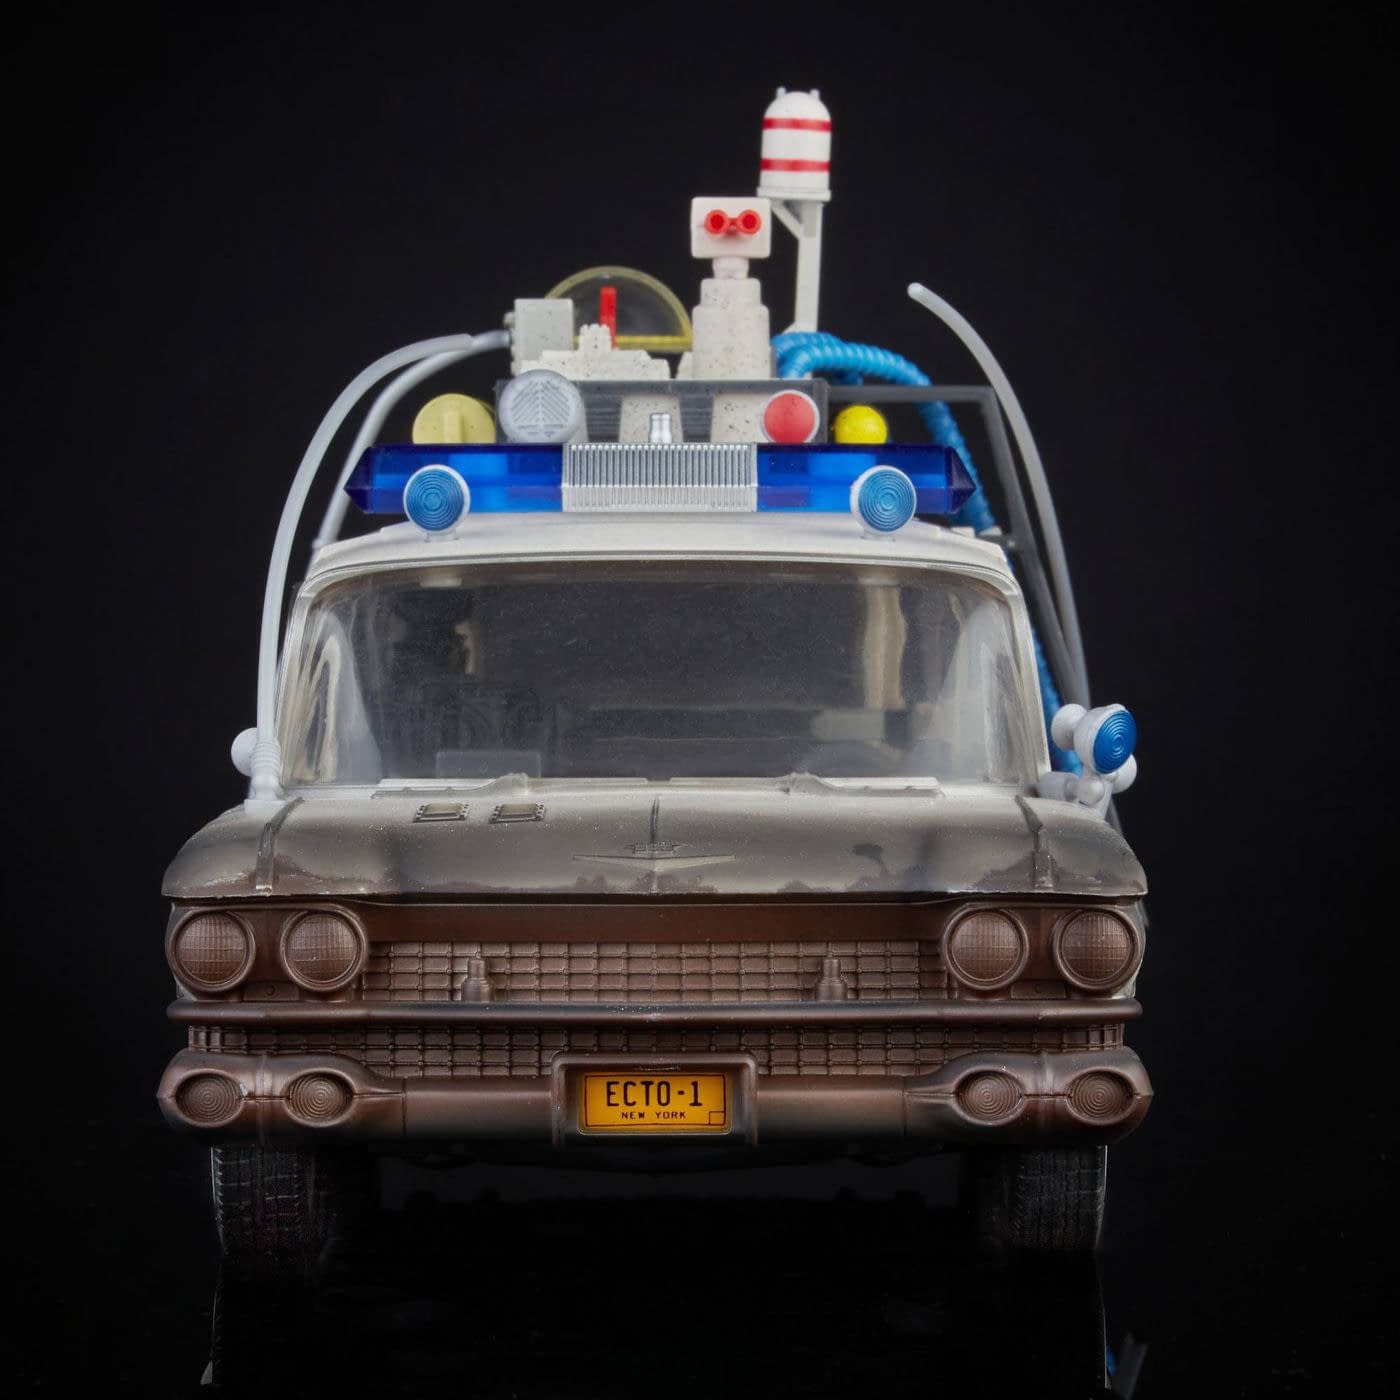 ghostbusters afterlife ecto 1 set photos